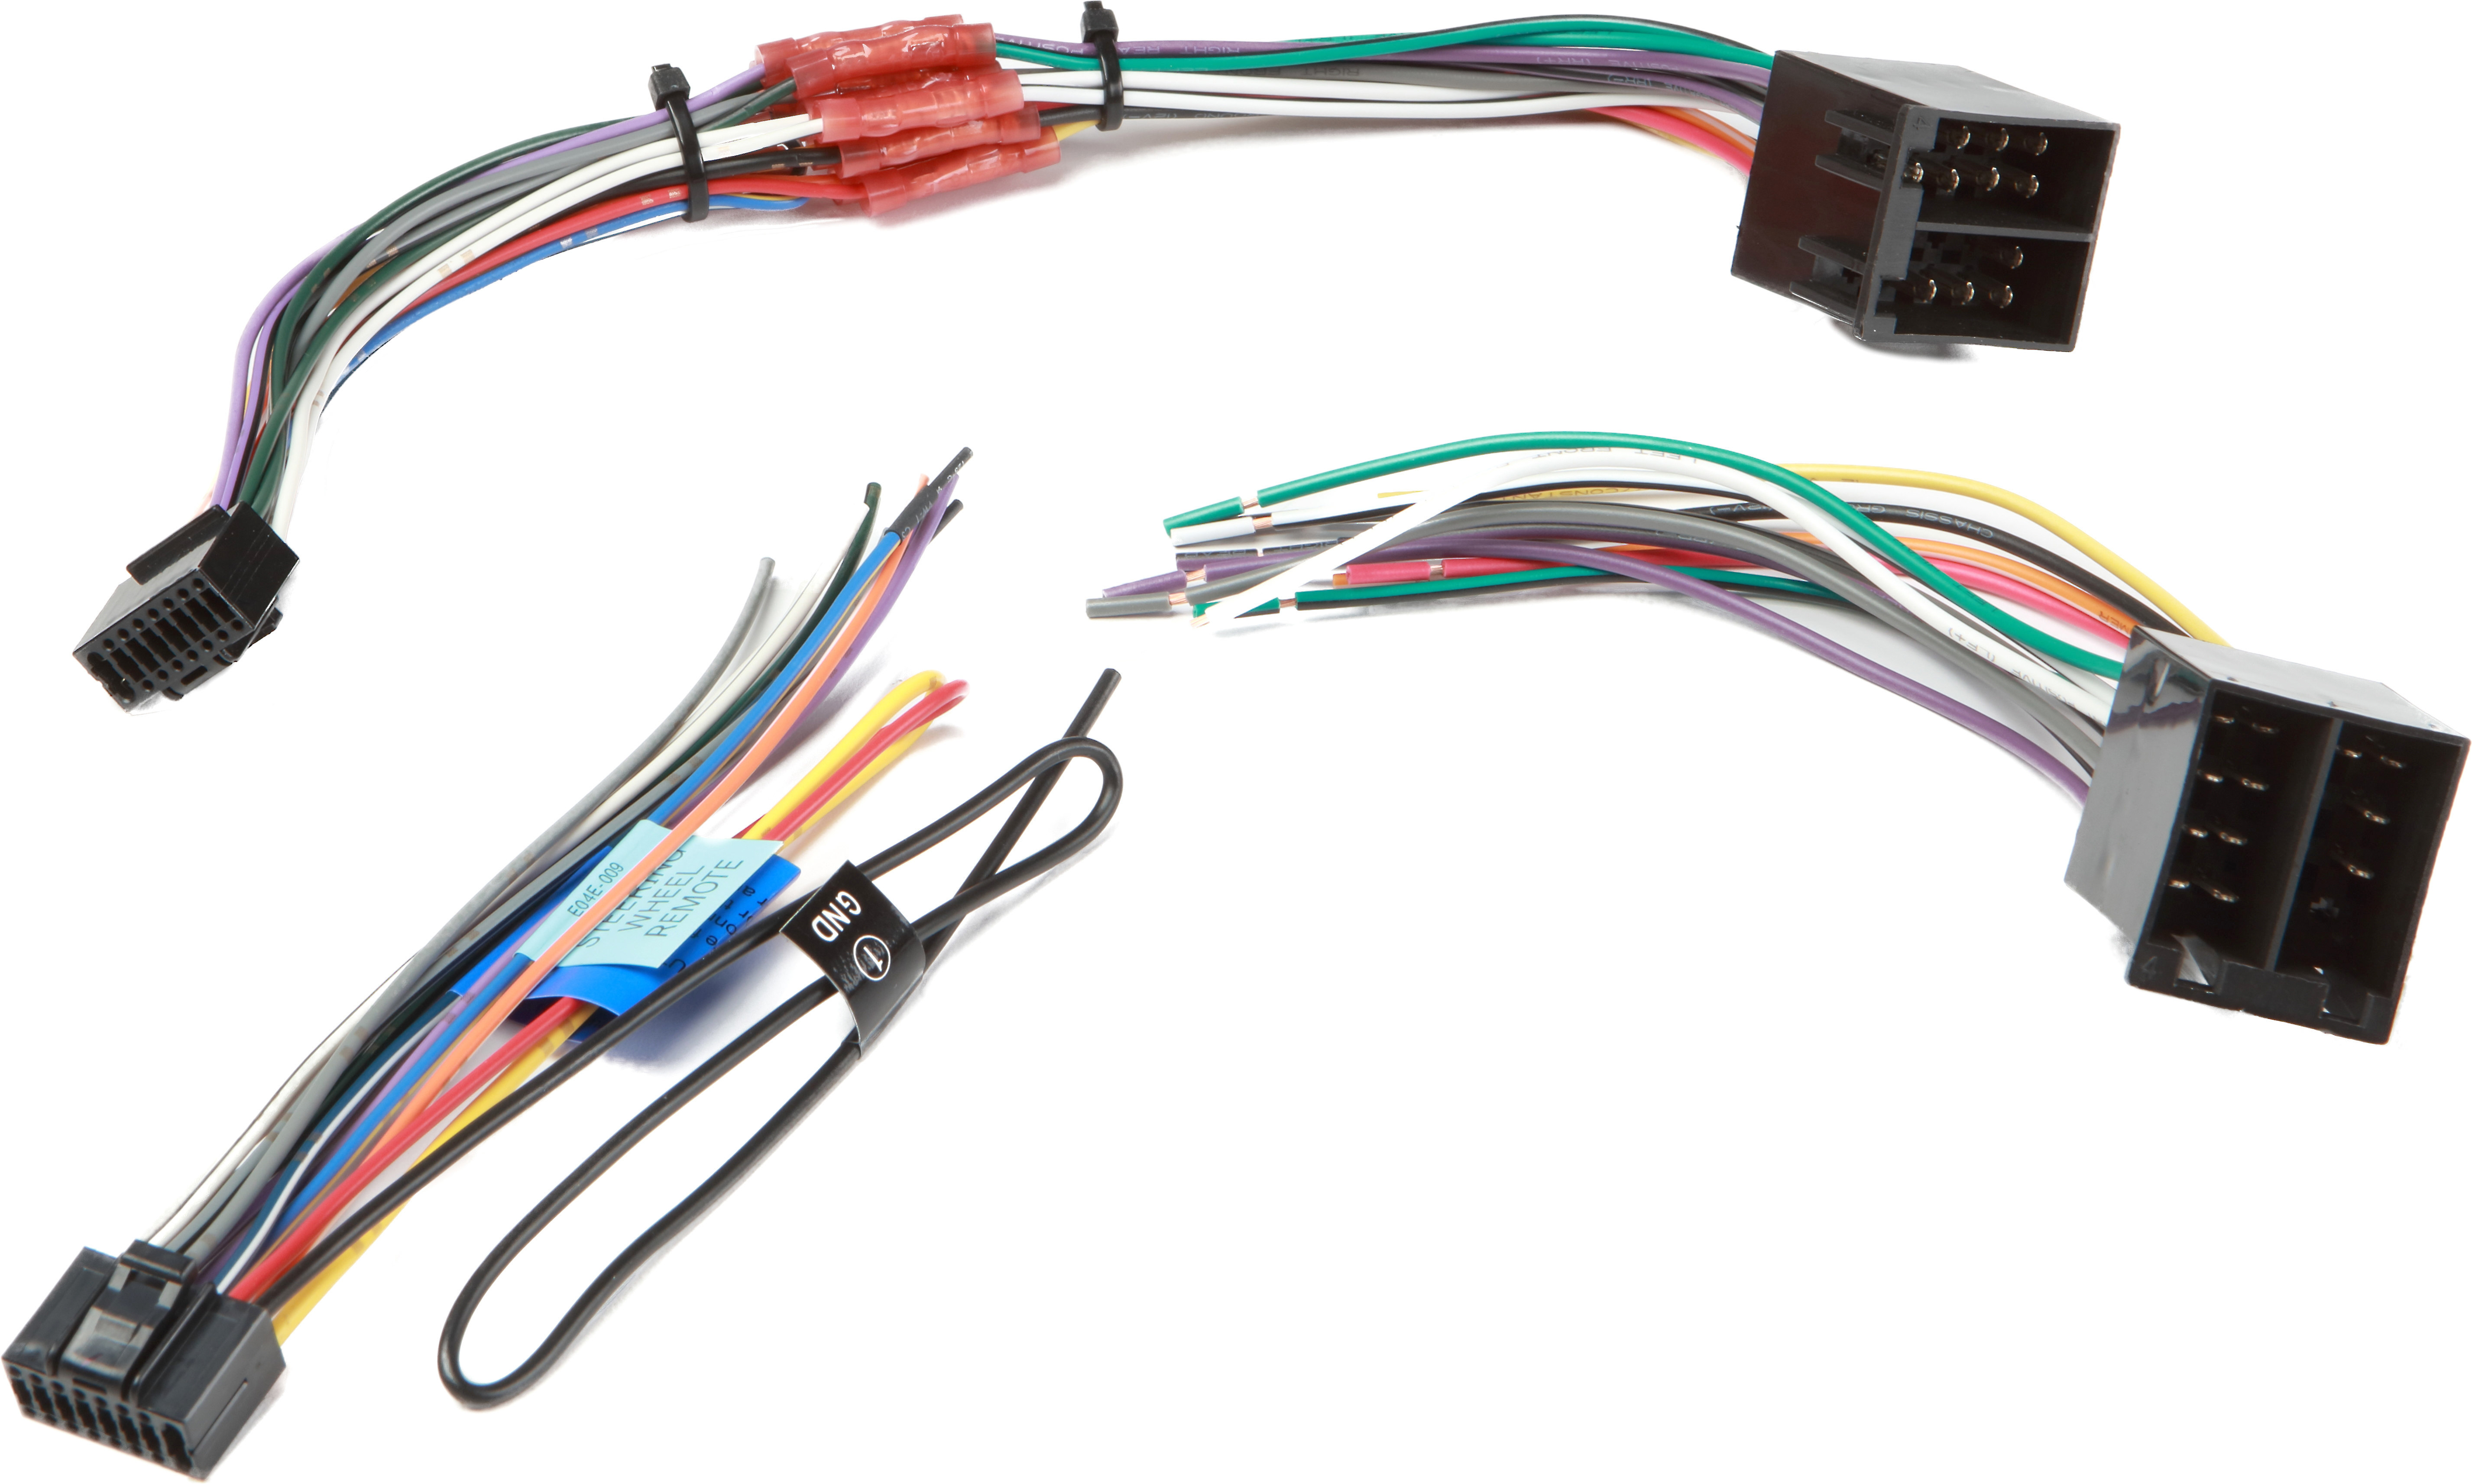 Toyota Avalon Wiring Harness from images.crutchfieldonline.com